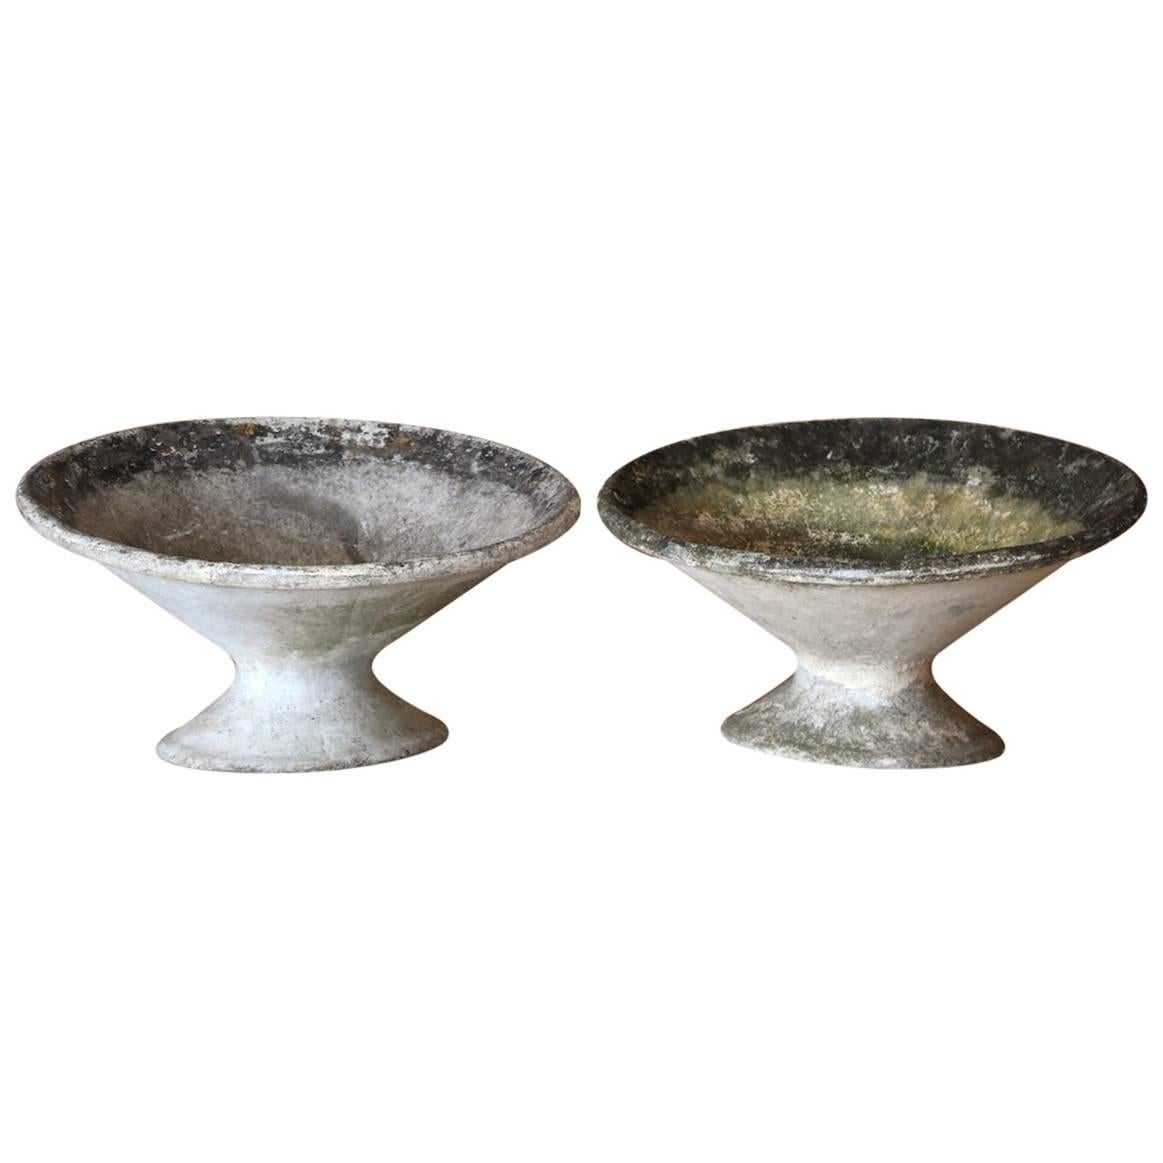 Pair of Willy Guhl and Anton Bee Concrete Garden Planters, Eternit, Switzerland For Sale